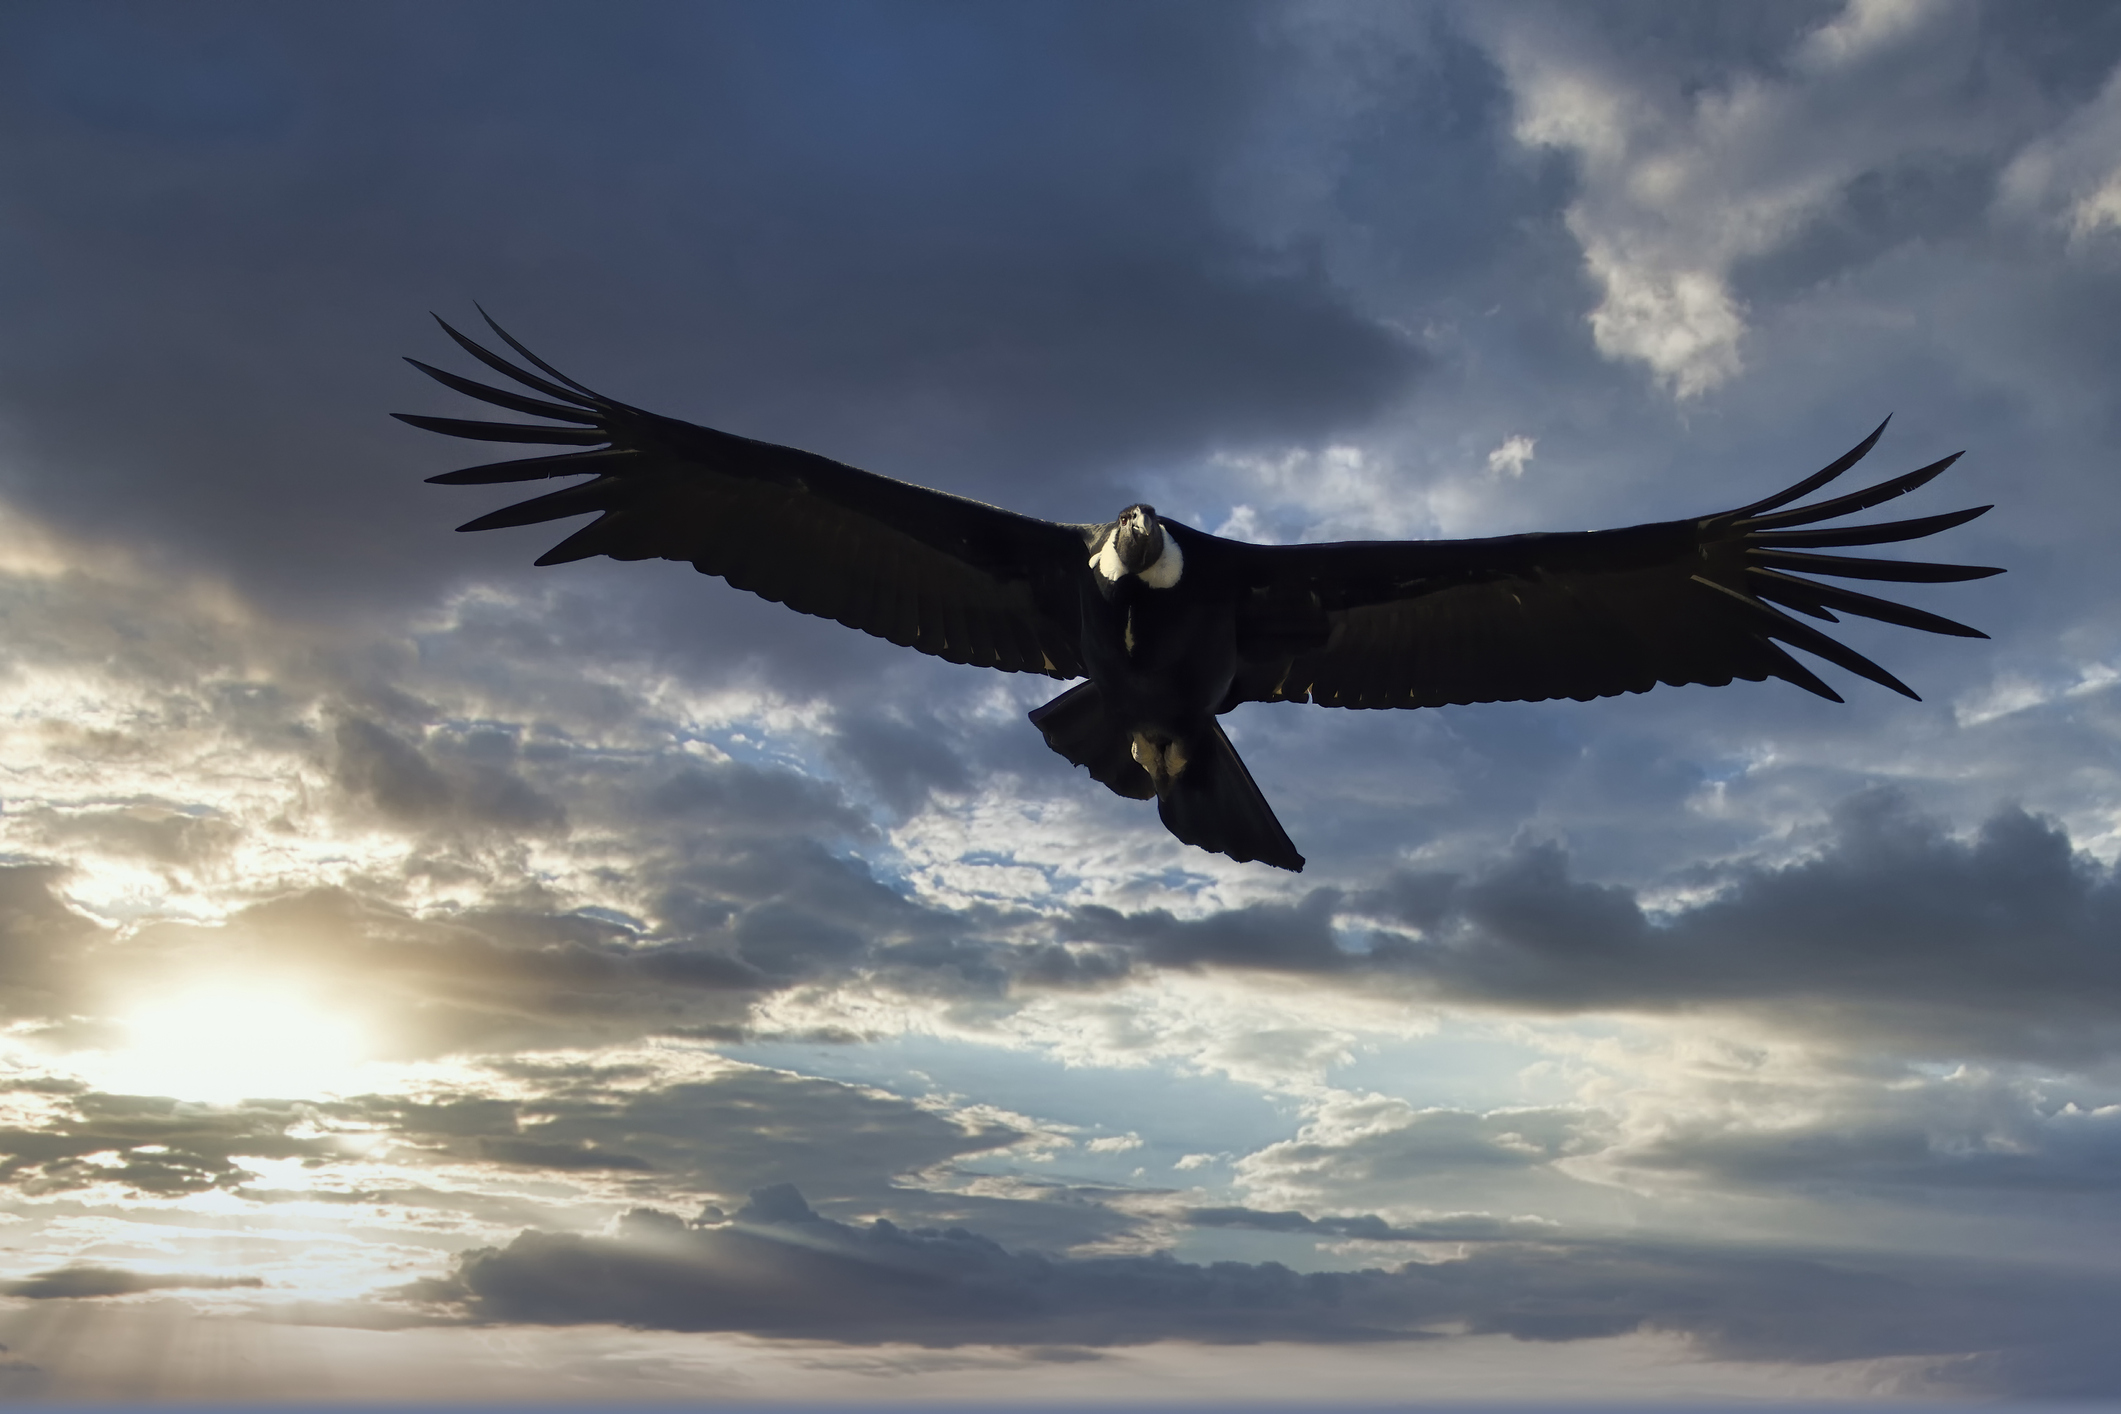 Photo of Andean Condor flying with a cloudy sky in the background.